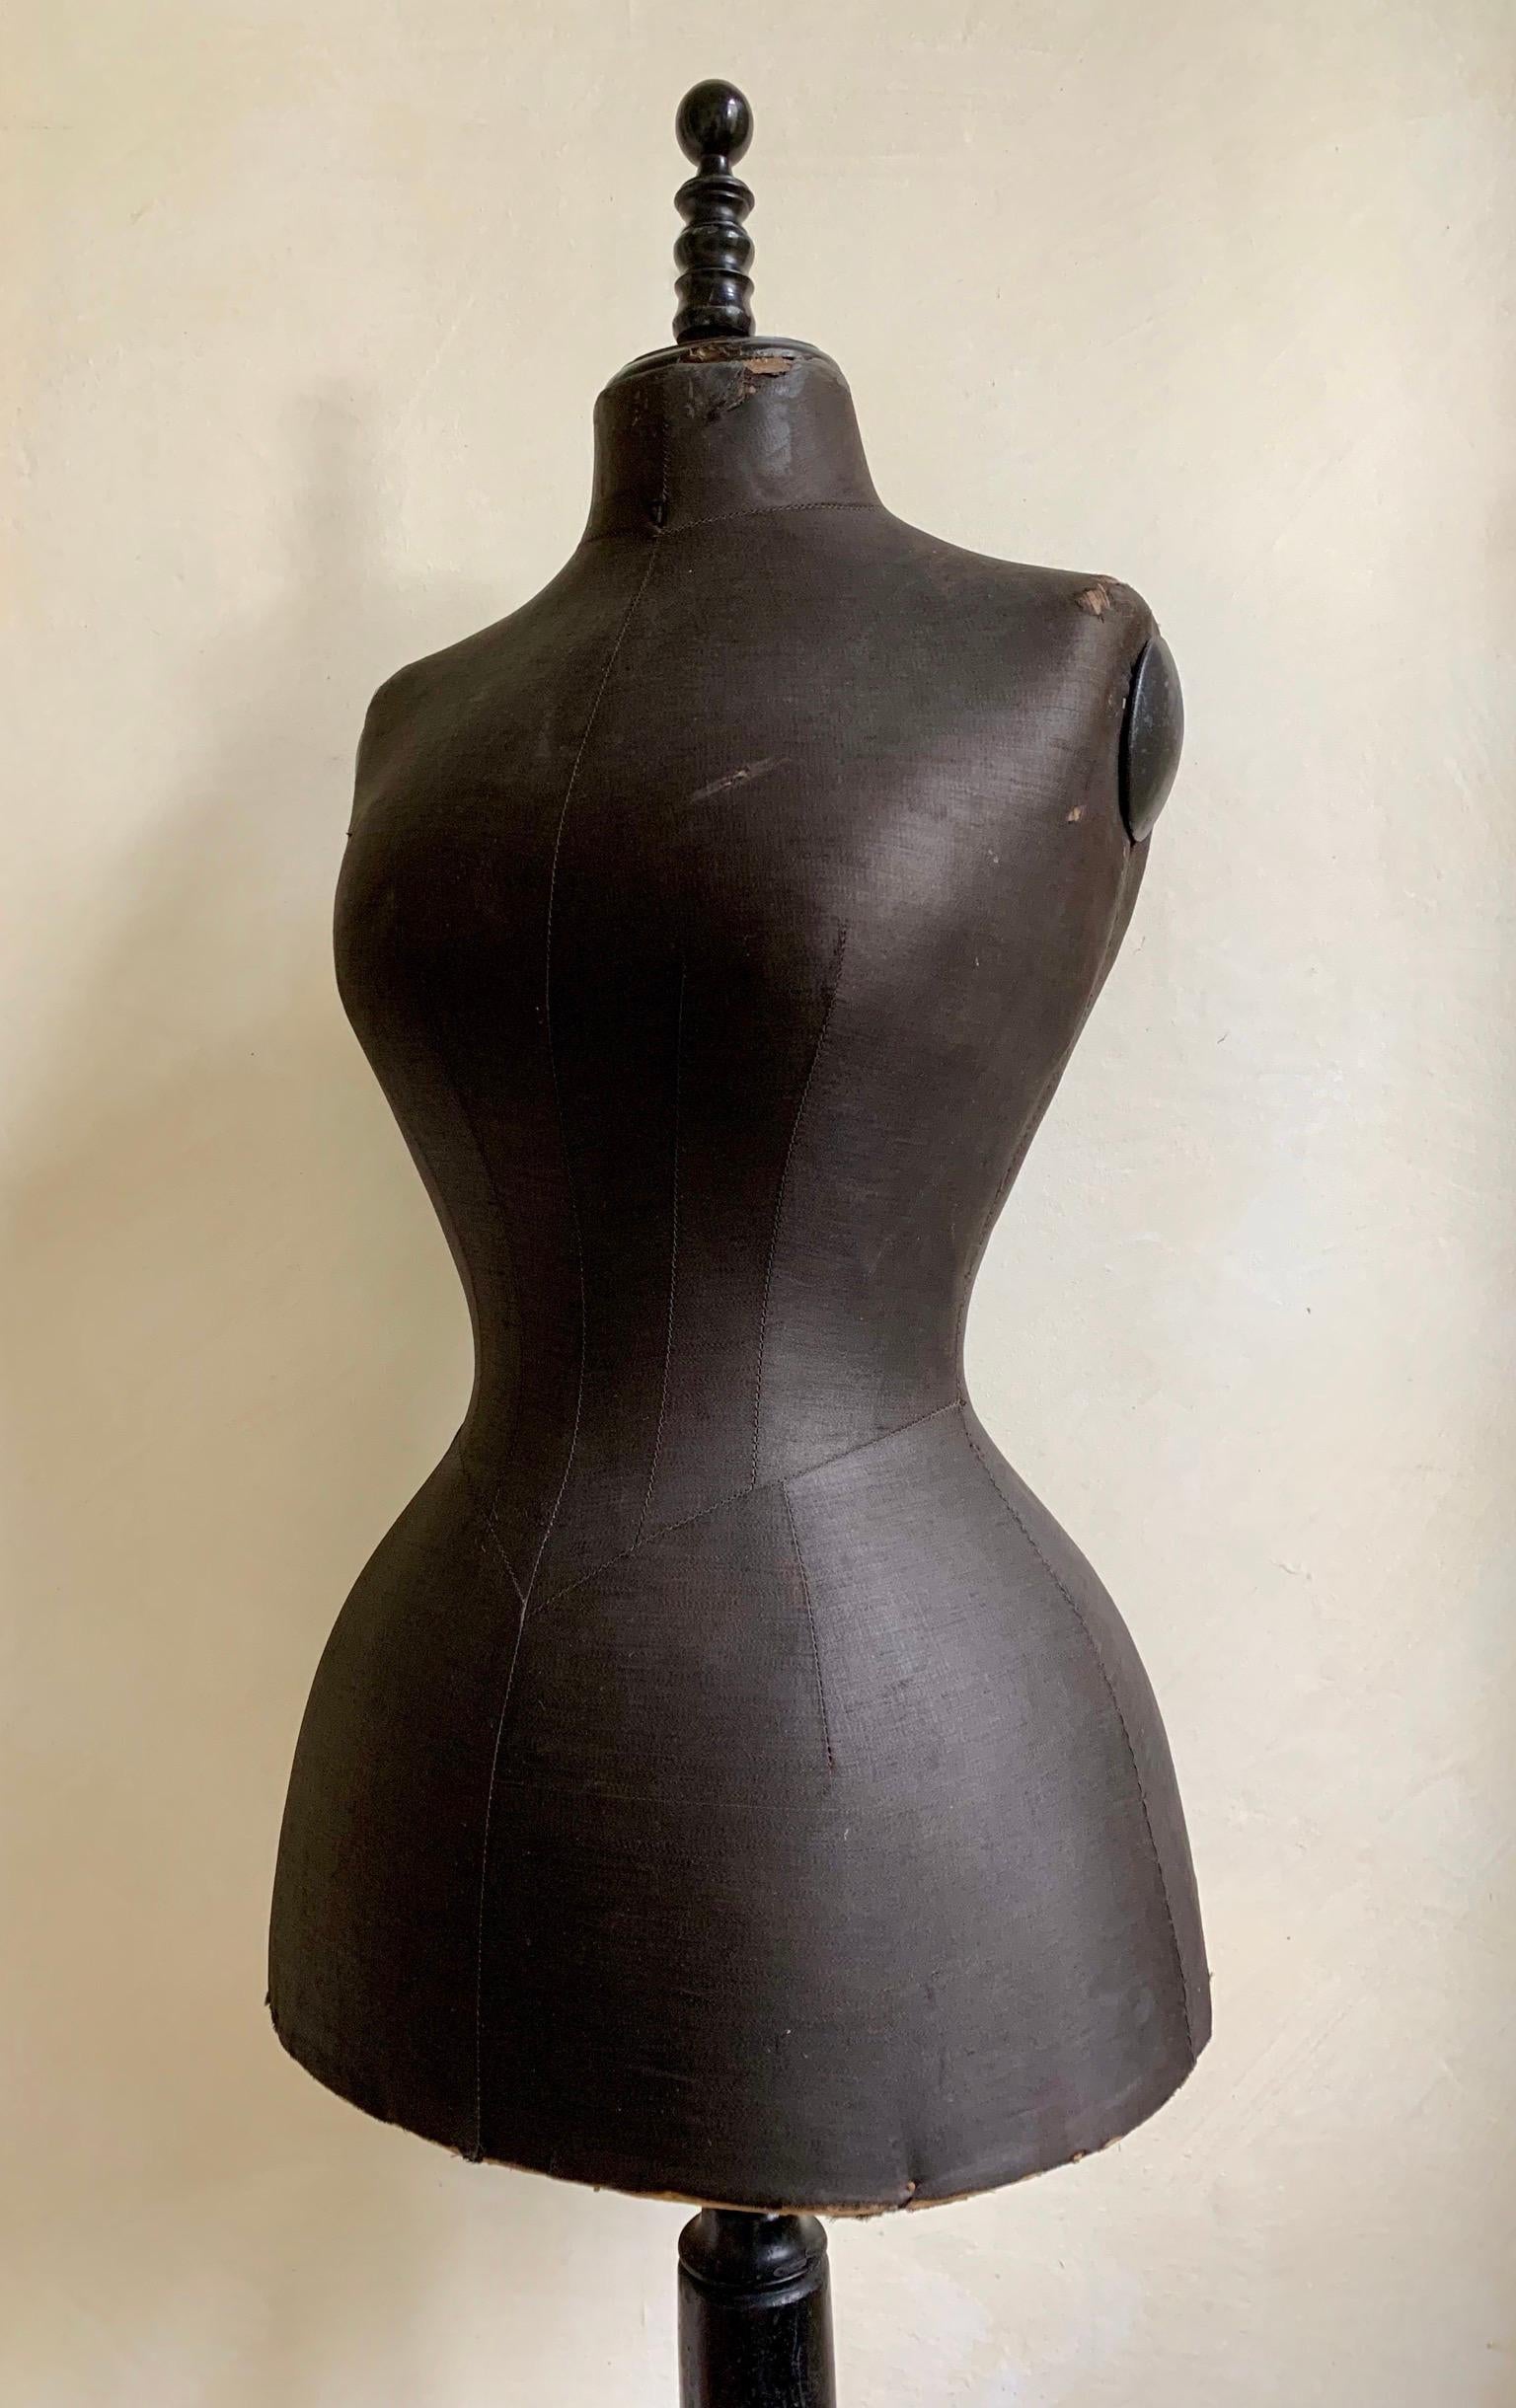 Original condition dummy in ebonized wood finials and black silk finish on body on tripod base.
Wasp waist and wide hip dates this to late 19th century.